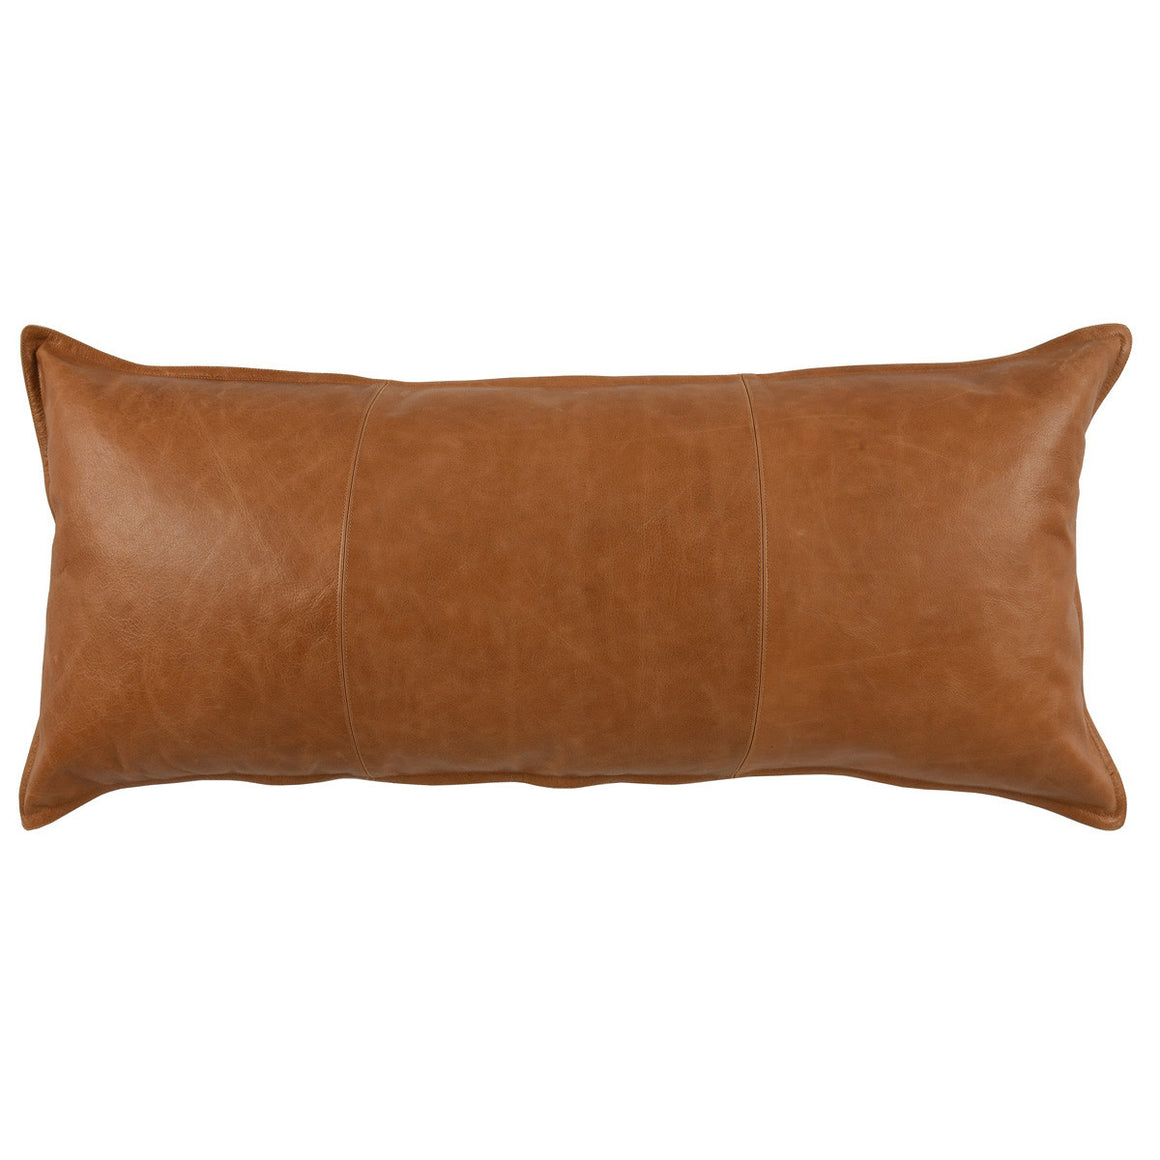 Dumont 16x36 Leather Pillow - Classic Carolina Home